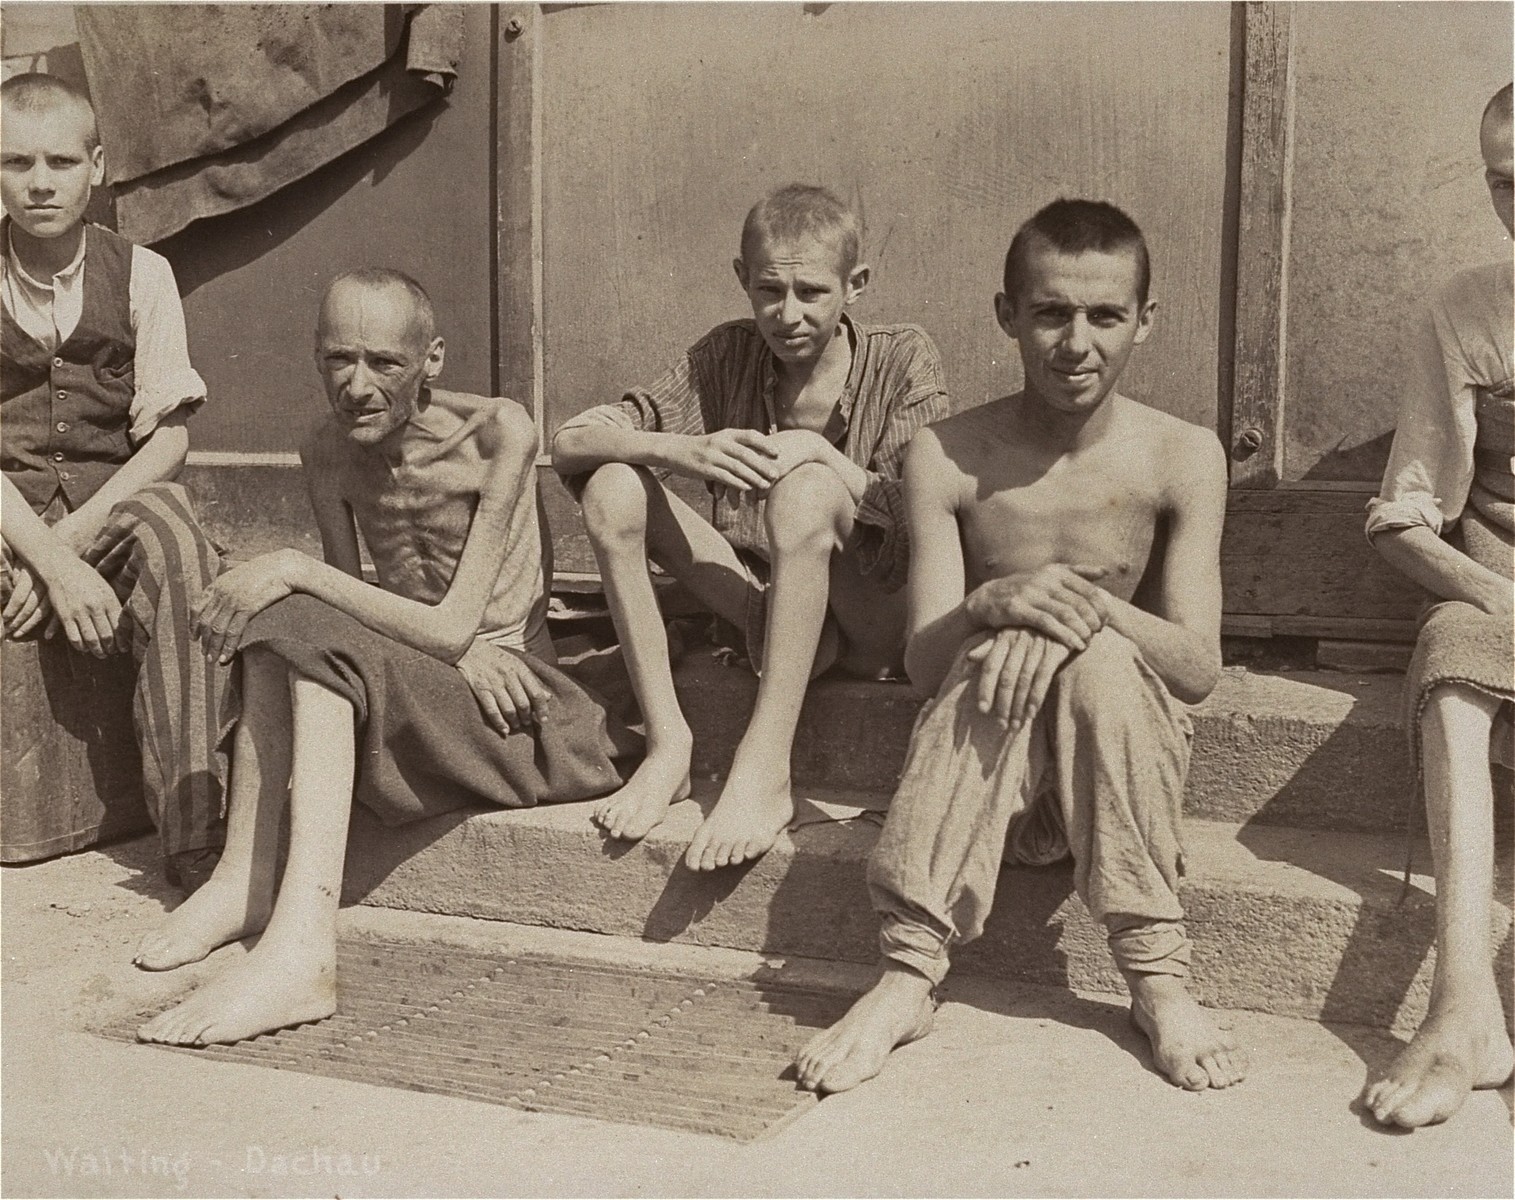 A group of emaciated survivors sit outside a barracks in the newly liberated Dachau concentration camp.